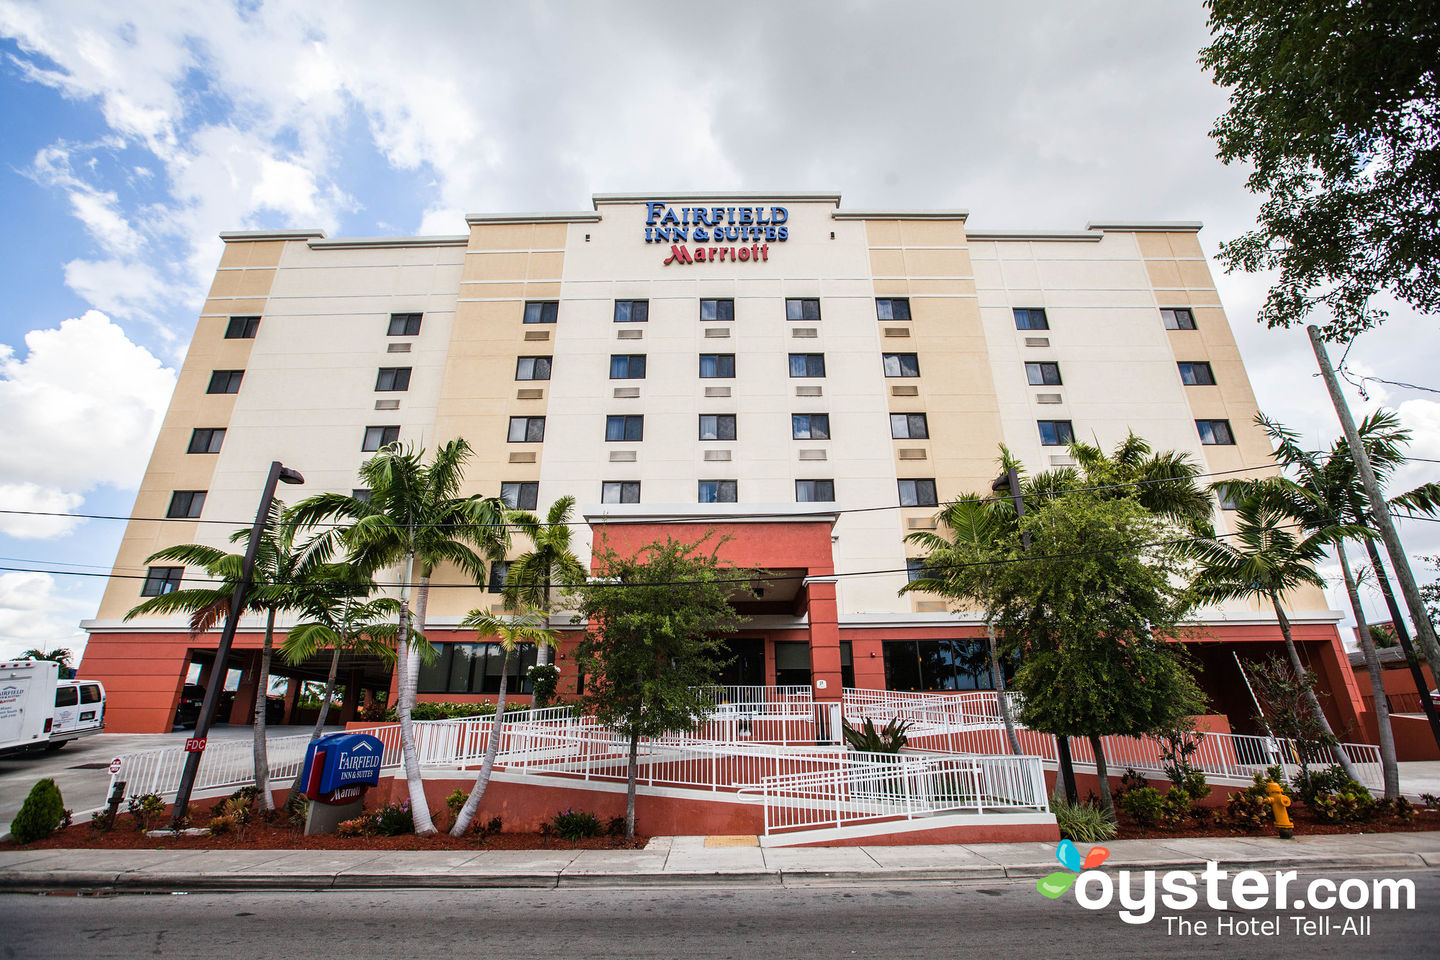 Fairfield Inn Suites Miami Airport South Review  What REALLY